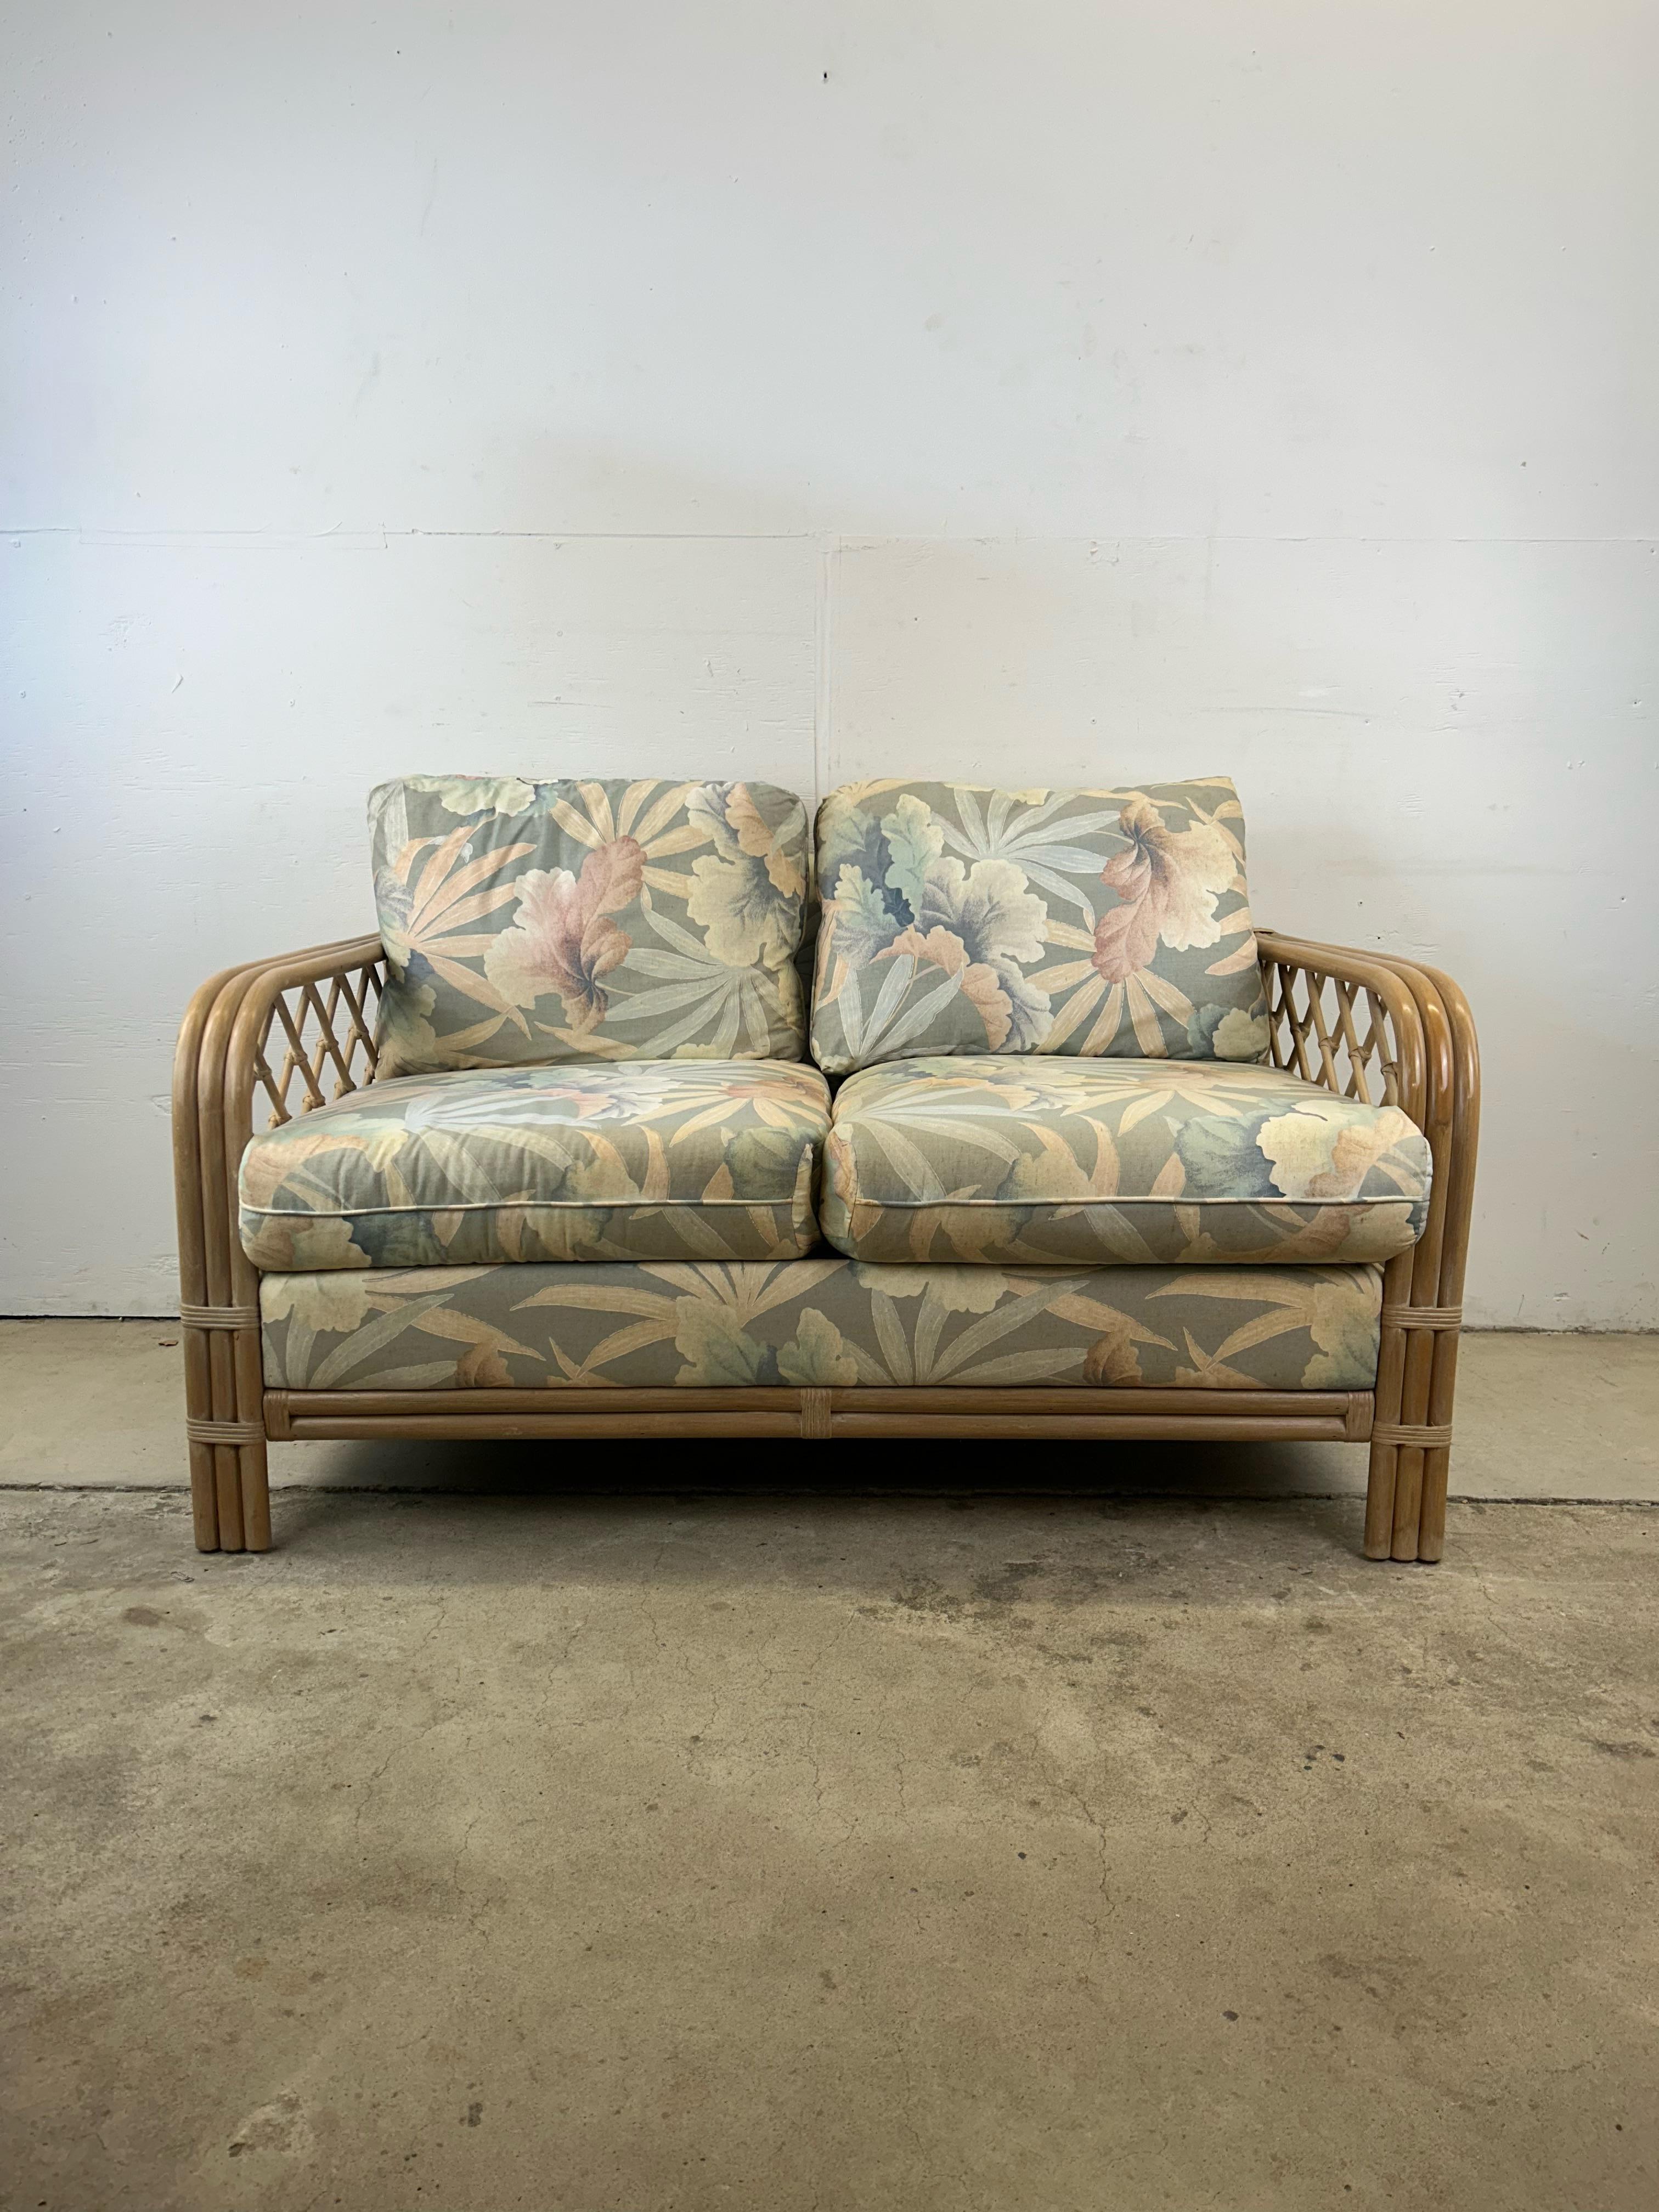 Bohemian Vintage Boho Chic Rattan Loveseat with Floral Upholstery For Sale